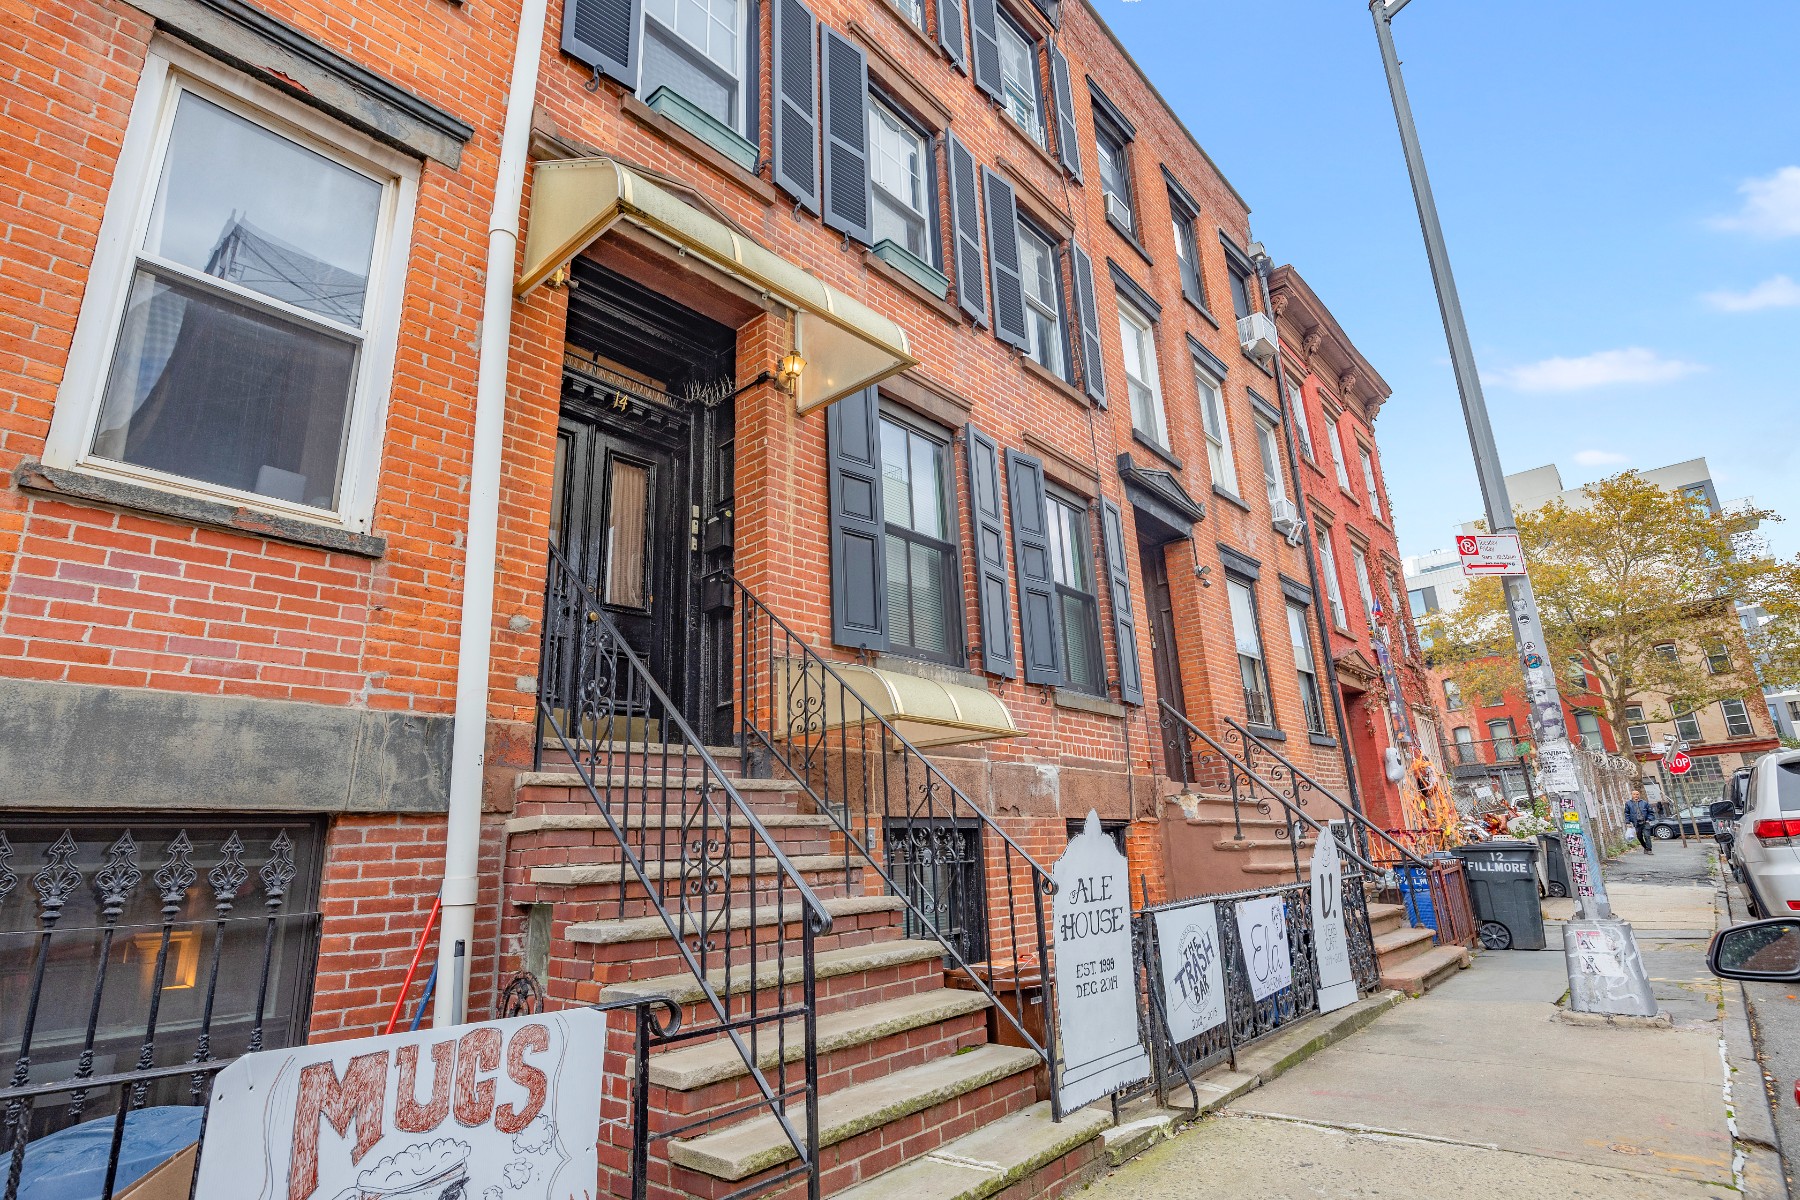 14 Fillmore Place  , Williamsburg, Brooklyn, New York - 6 Bedrooms  
4.5 Bathrooms  
8 Rooms - 